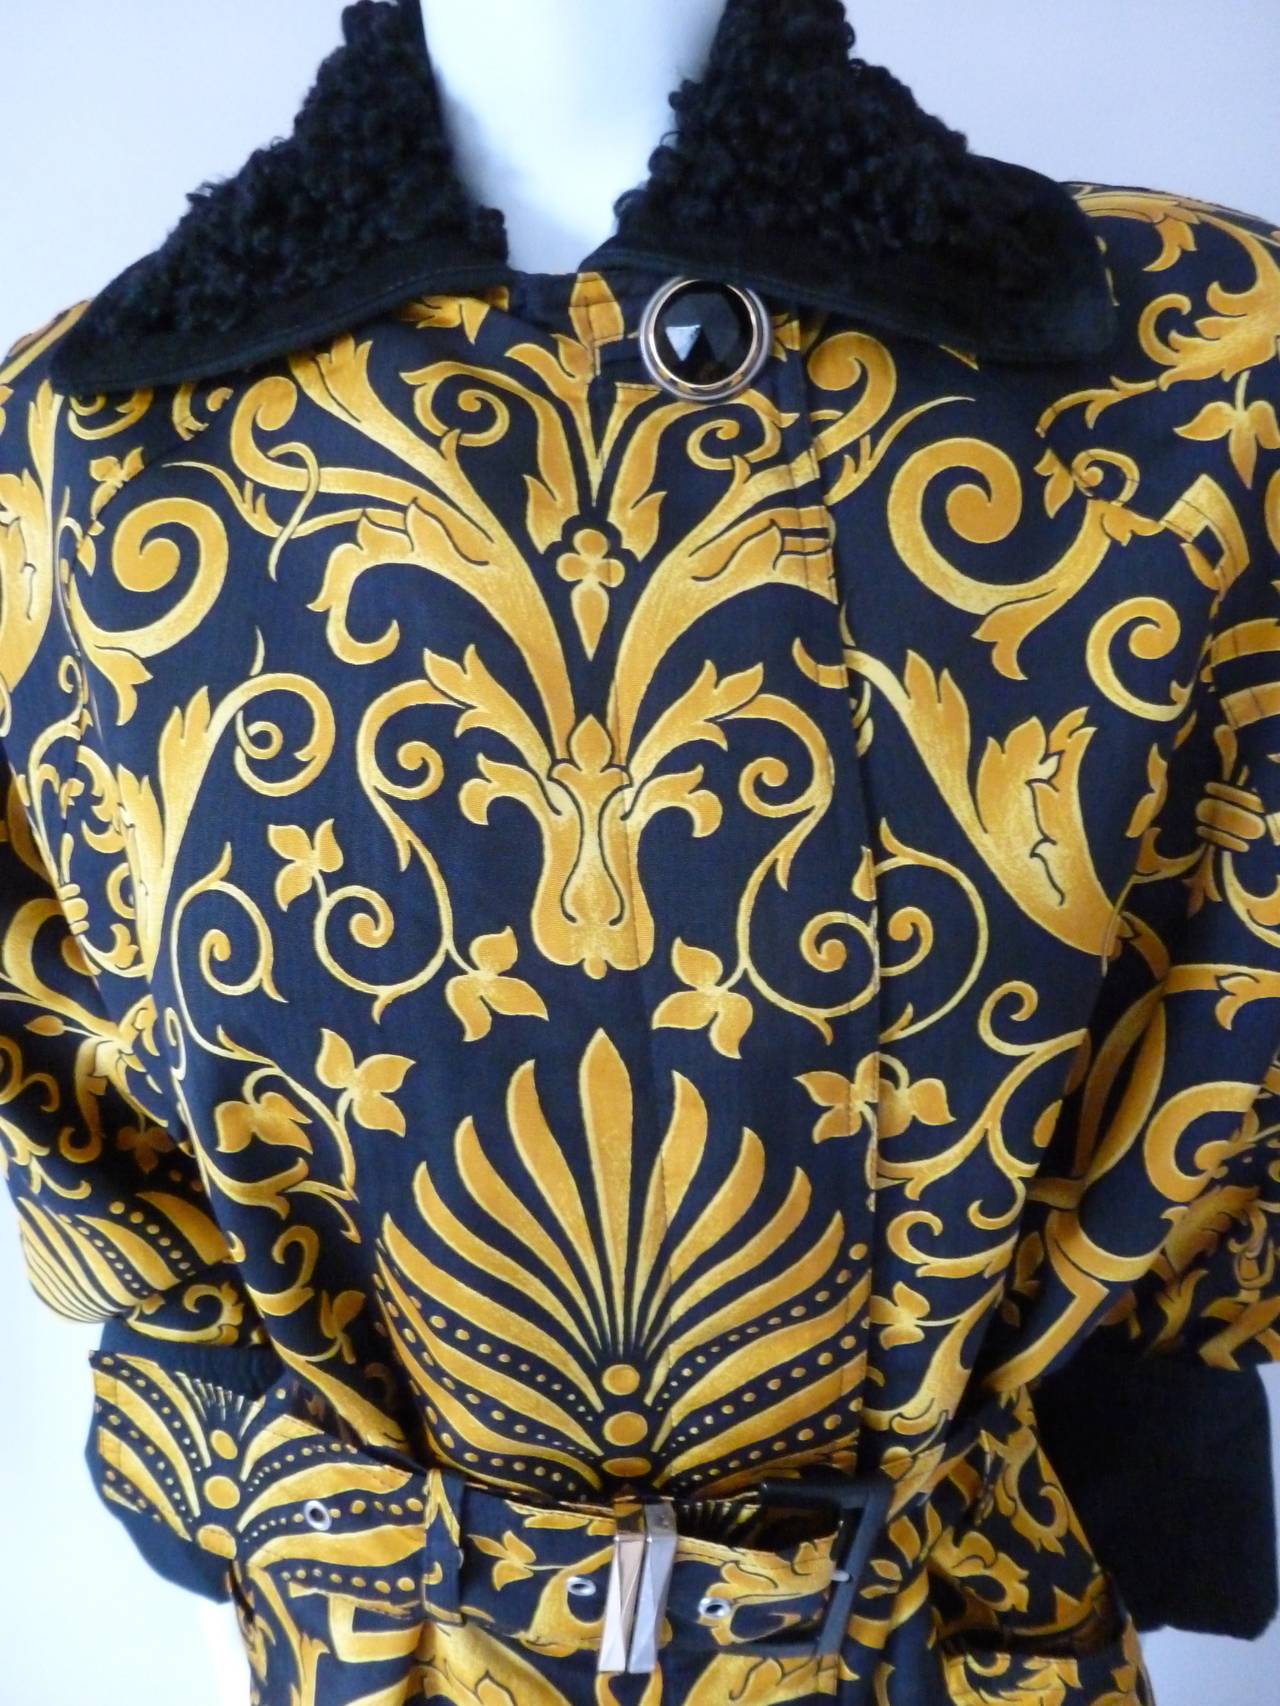 Iconic Gianni Versace gold and black Baroque printed silk belted raincoat from the Fall 1991 collection. The raincoat features an astrakhan collar and is secured at the neck by an oversized gold-tone metal and black glass button.

Marked an